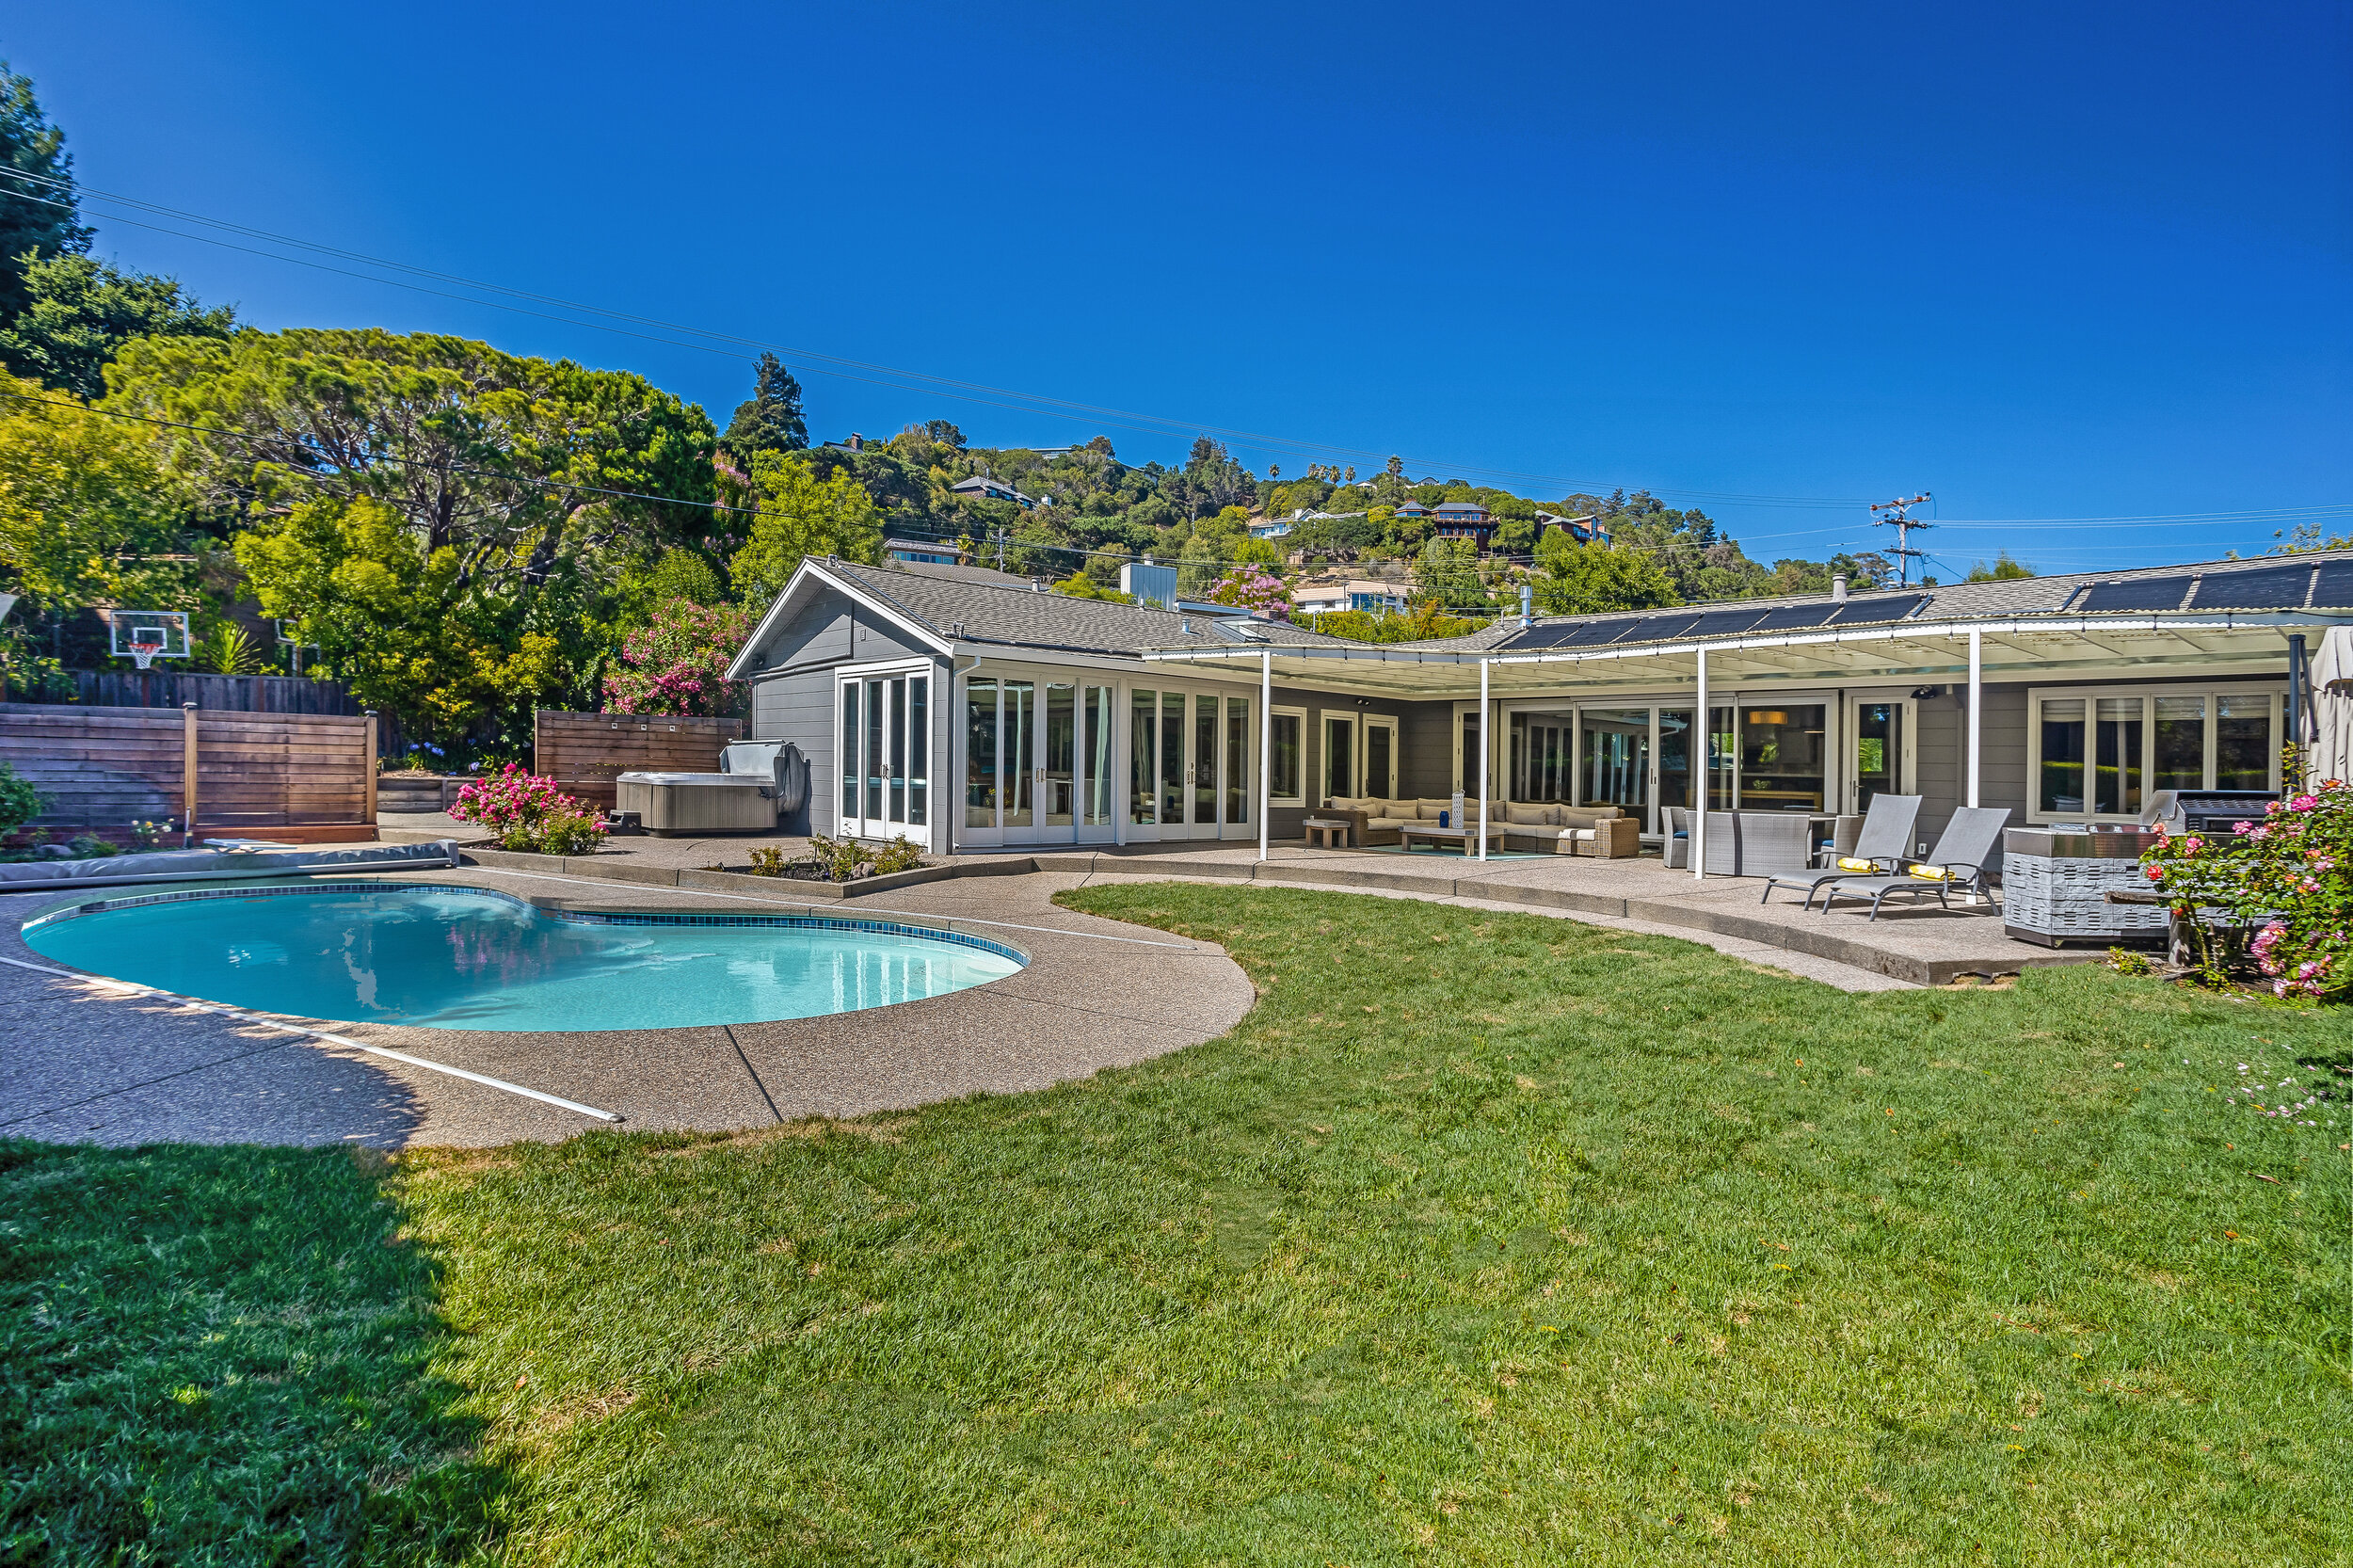 Own Marin Barr Haney Whitney Potter For Sale 11 Allensby Lane, San R California Marin County #1 Real Esate Agents-24.jpg